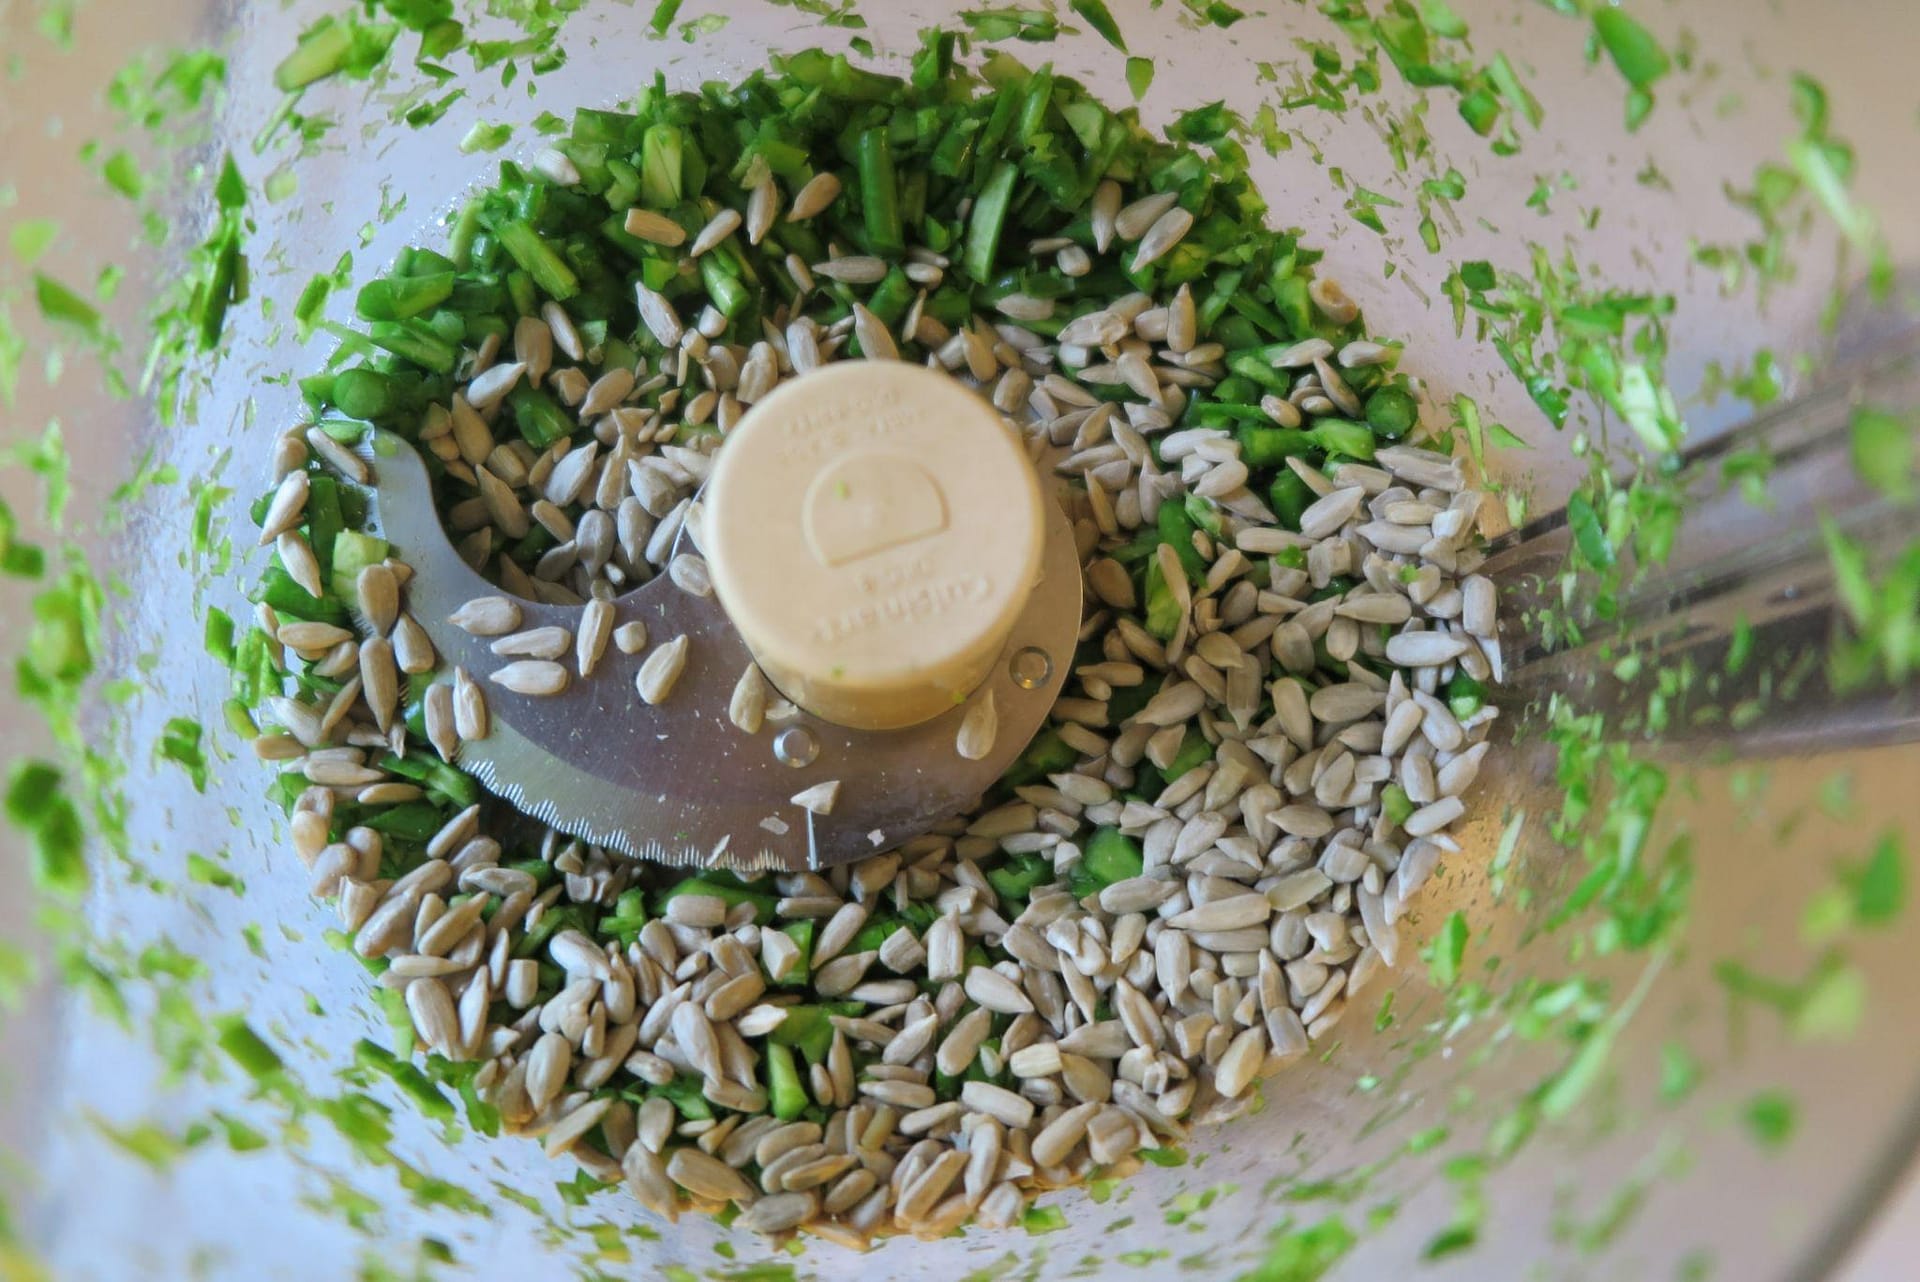 Roughly blended garlic scapes and sunflower seeds in a food processor